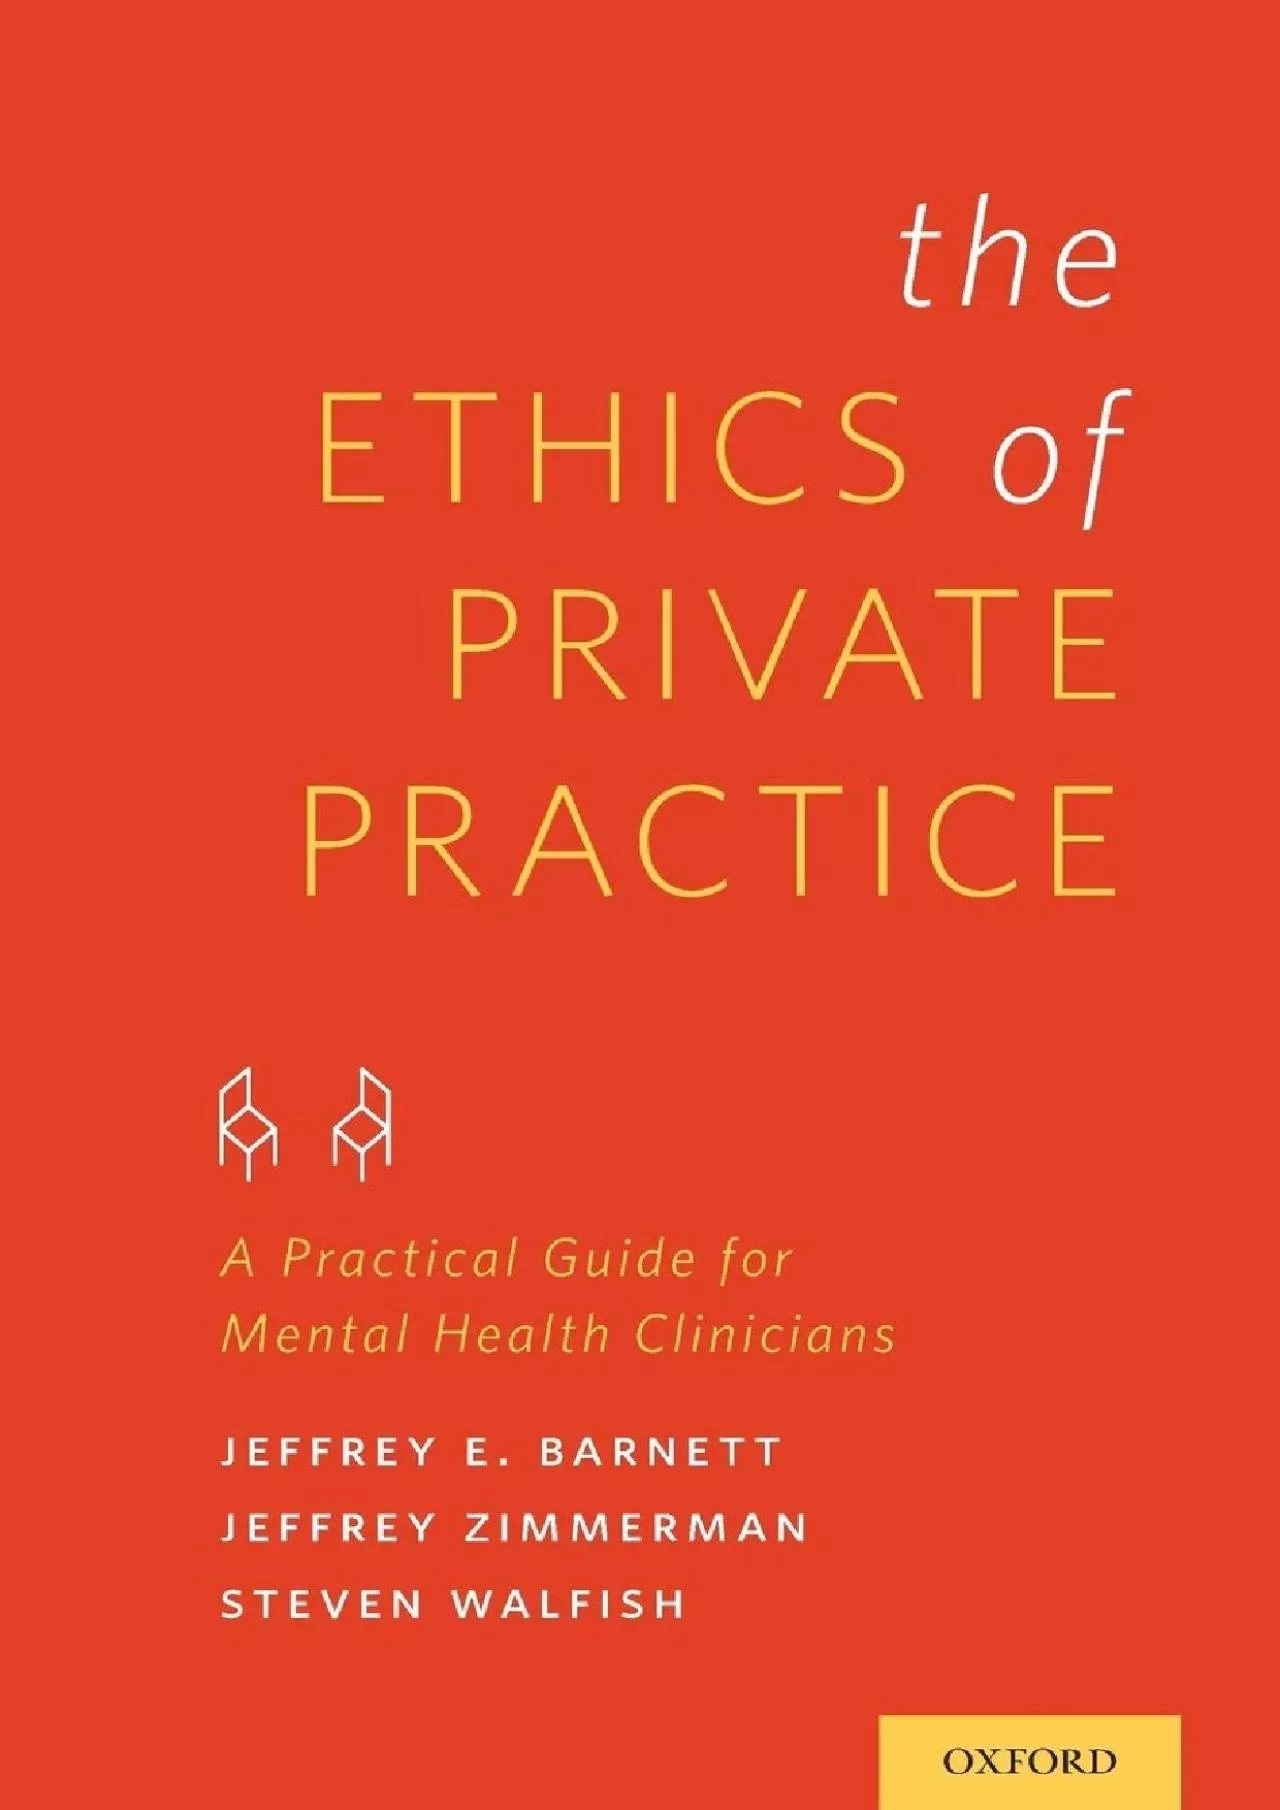 (BOOS)-The Ethics of Private Practice: A Practical Guide for Mental Health Clinicians